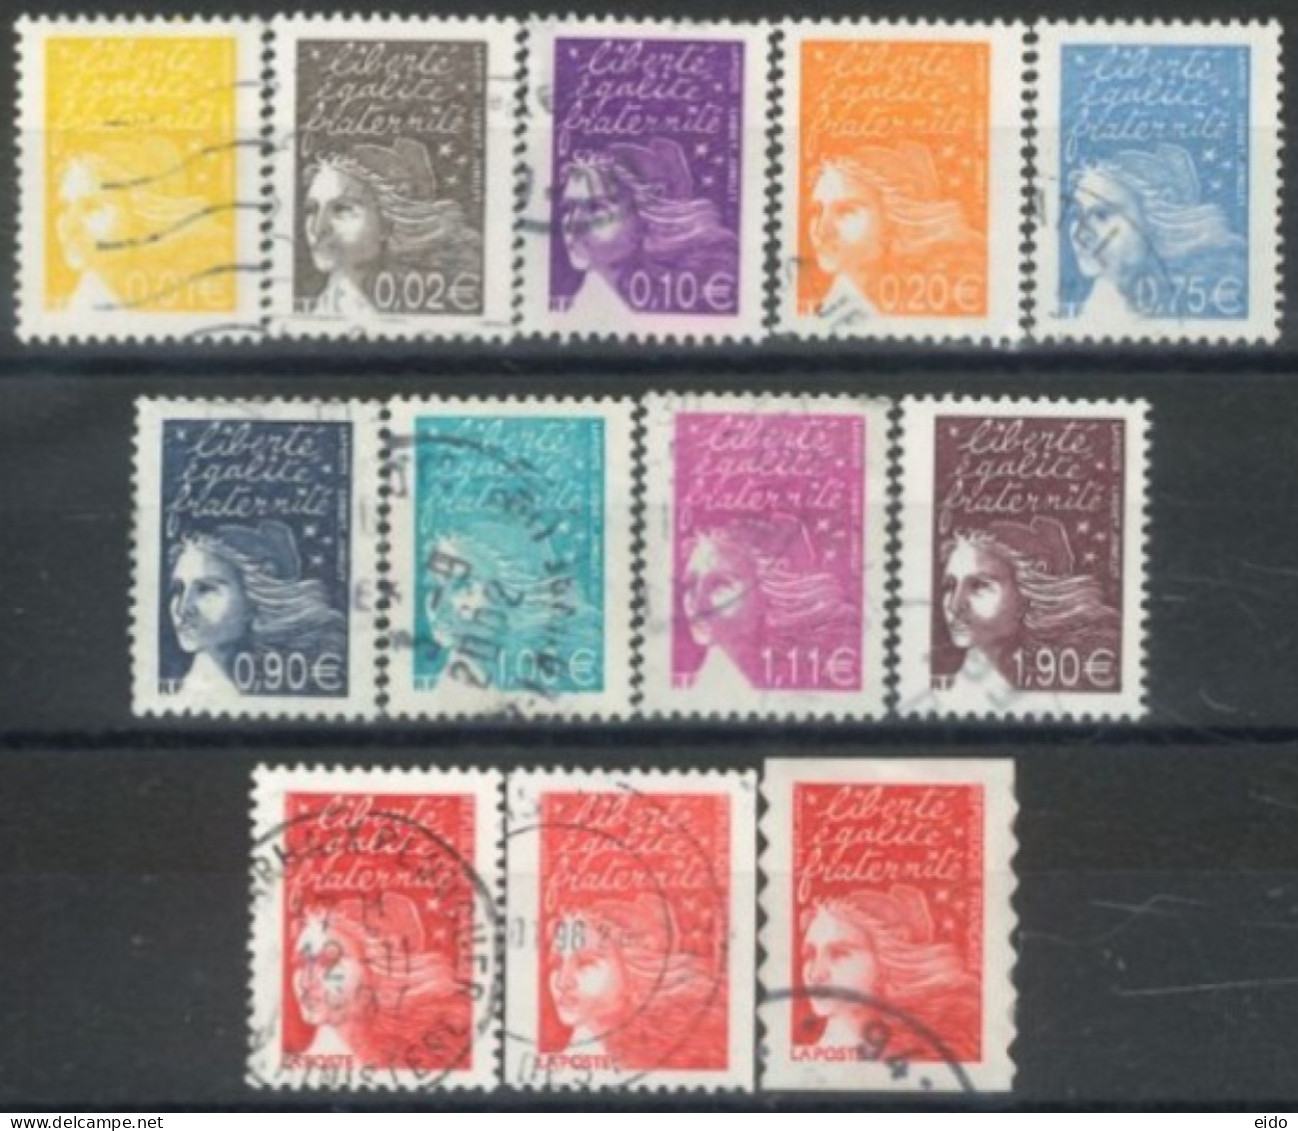 FRANCE - 2001/03 - MARIANNE STAMPS SET OF 12, USED - Used Stamps